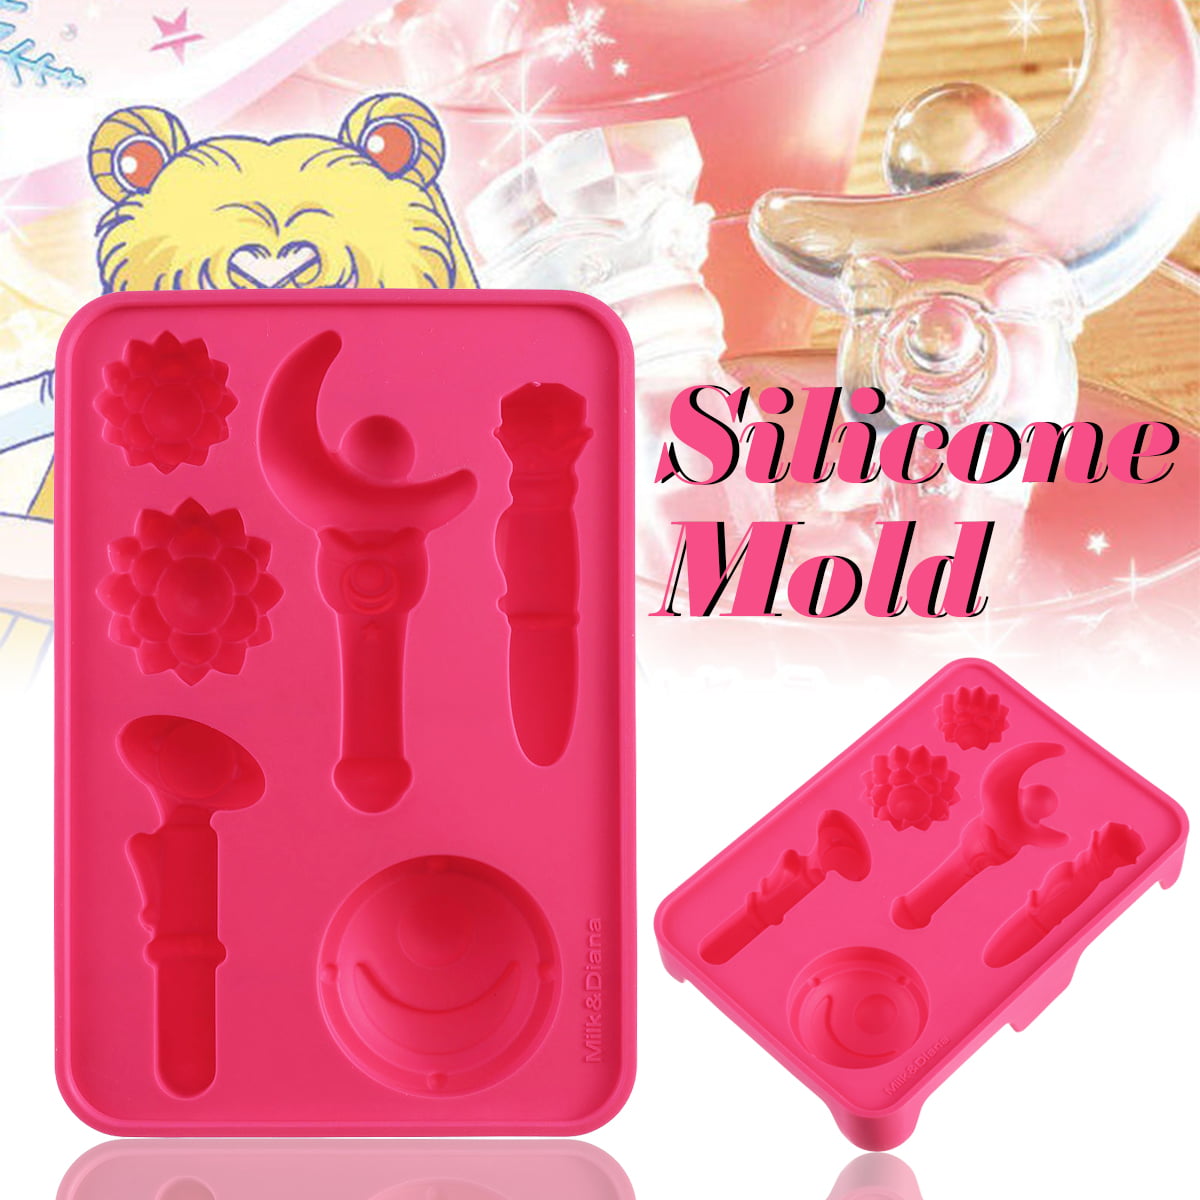 Silicone Mold For 3D Sailor Moon Chocolate Ice Cube Solid Mould Gift Props 